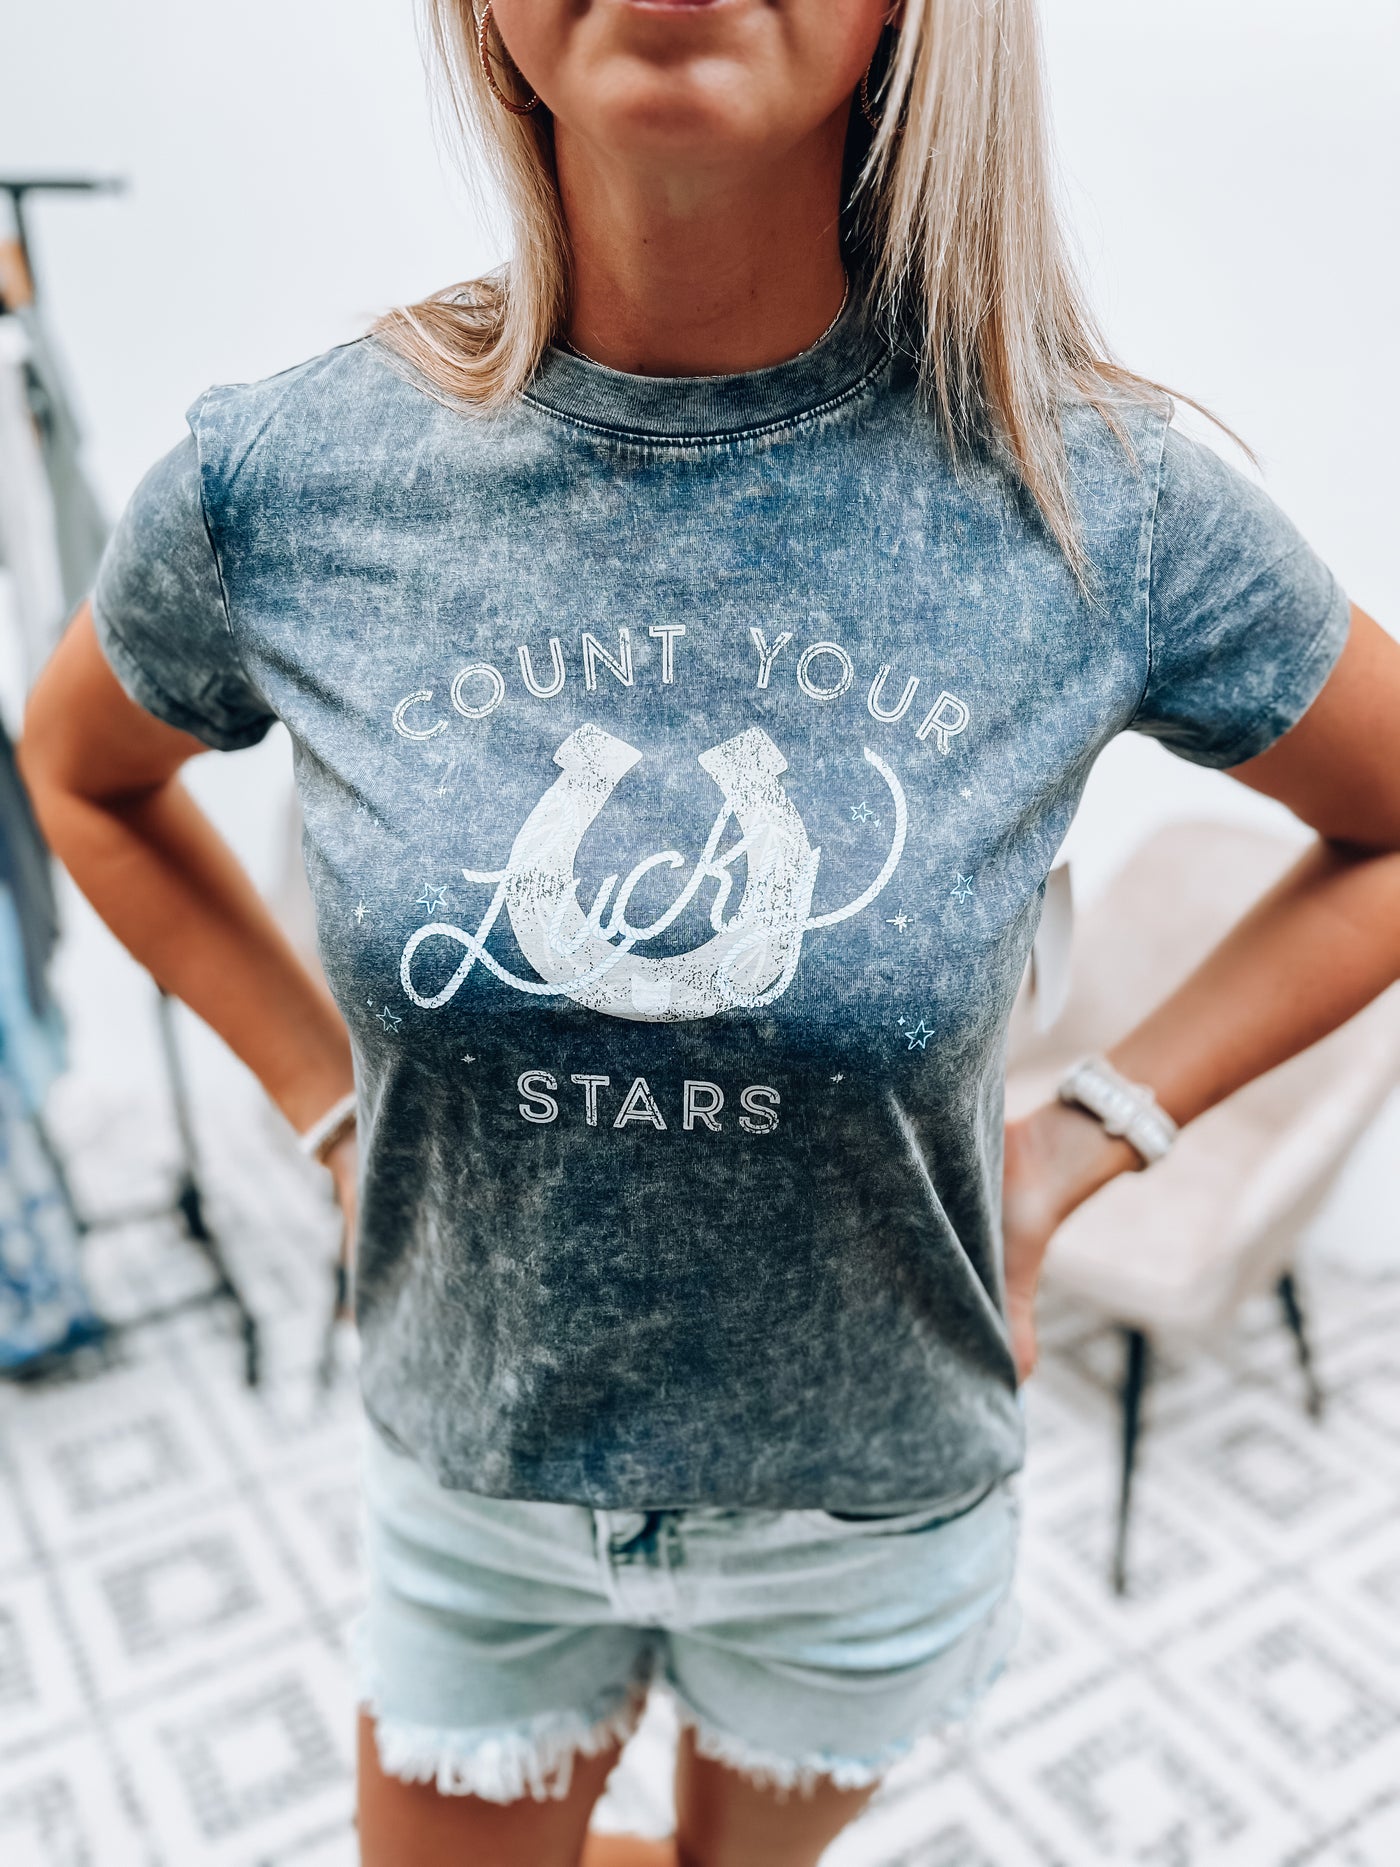 Acid Washed Navy/Charcoal Count Your Lucky Stars Graphic Tee